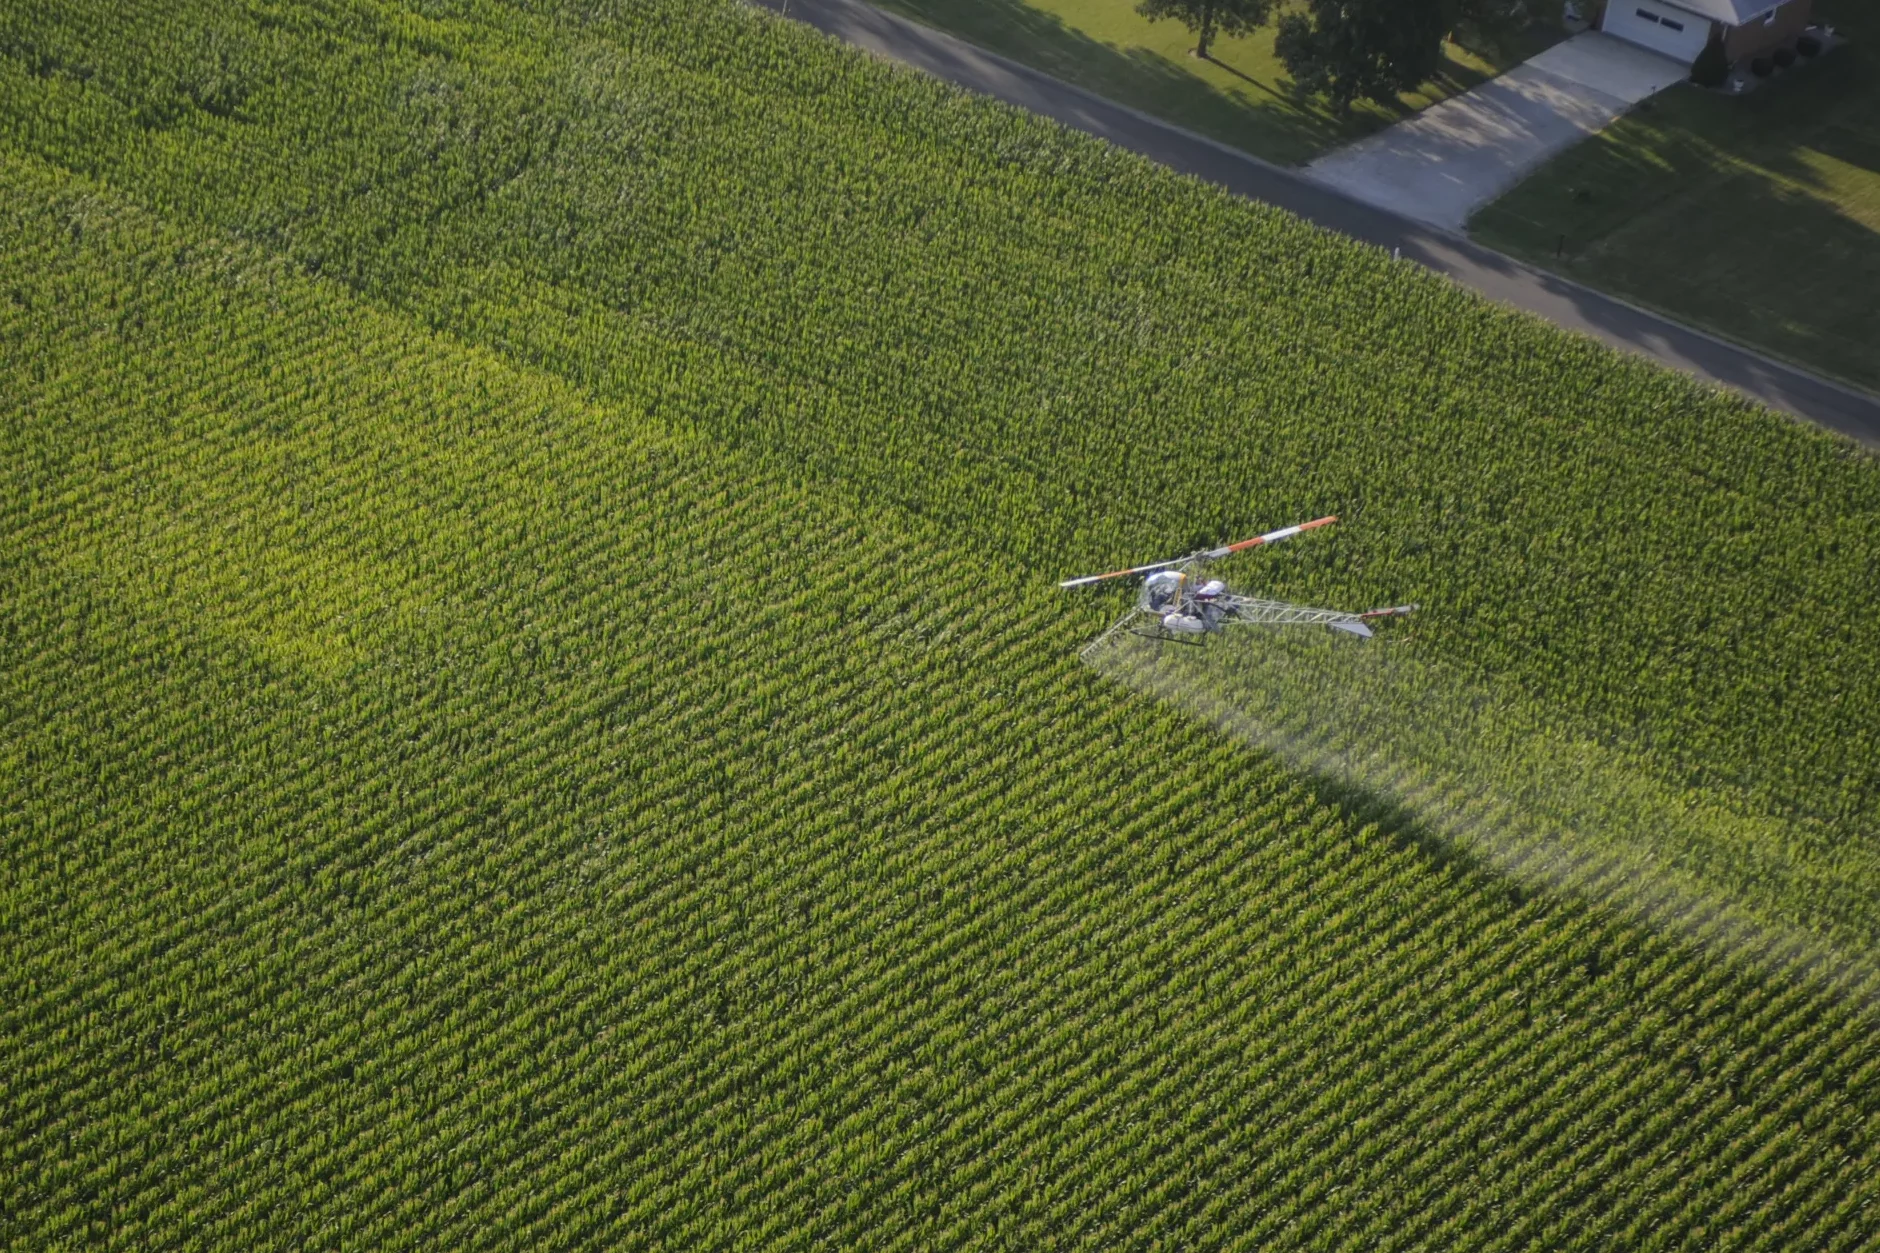 Photo from a news story MCIR posted about the dangers of Illinois pesticide exposure.